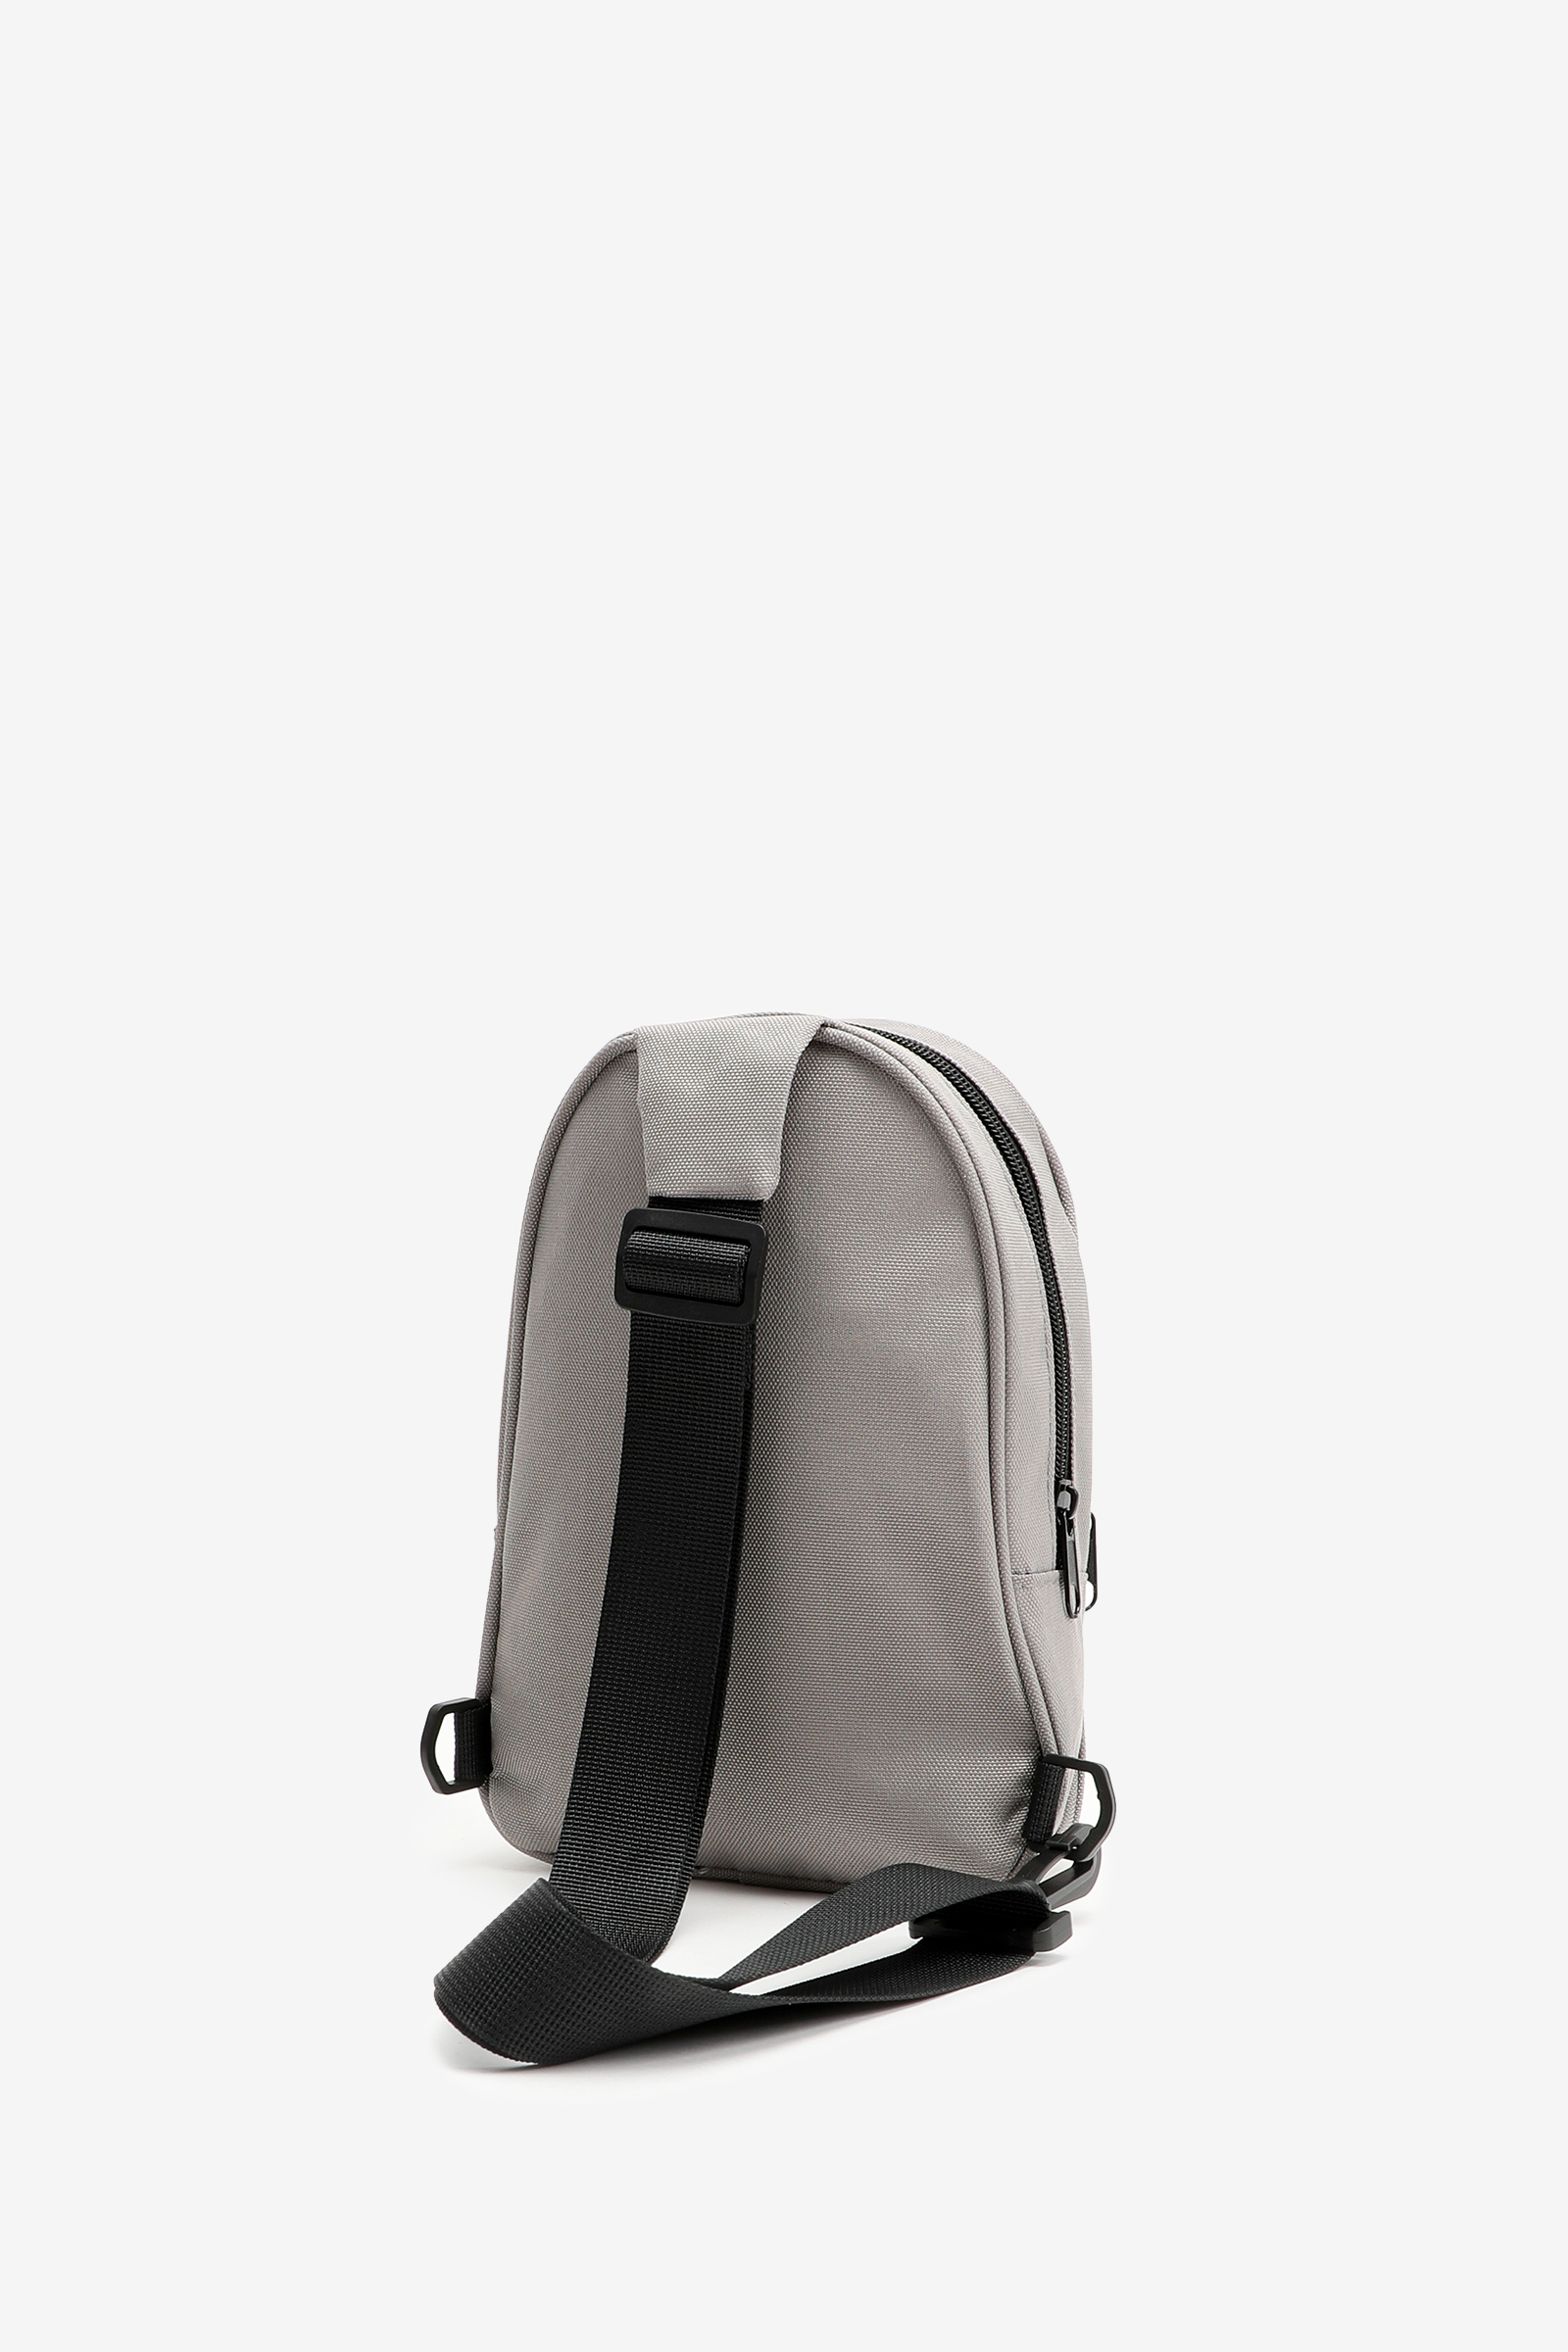 Join the Movement Canvas Backpack